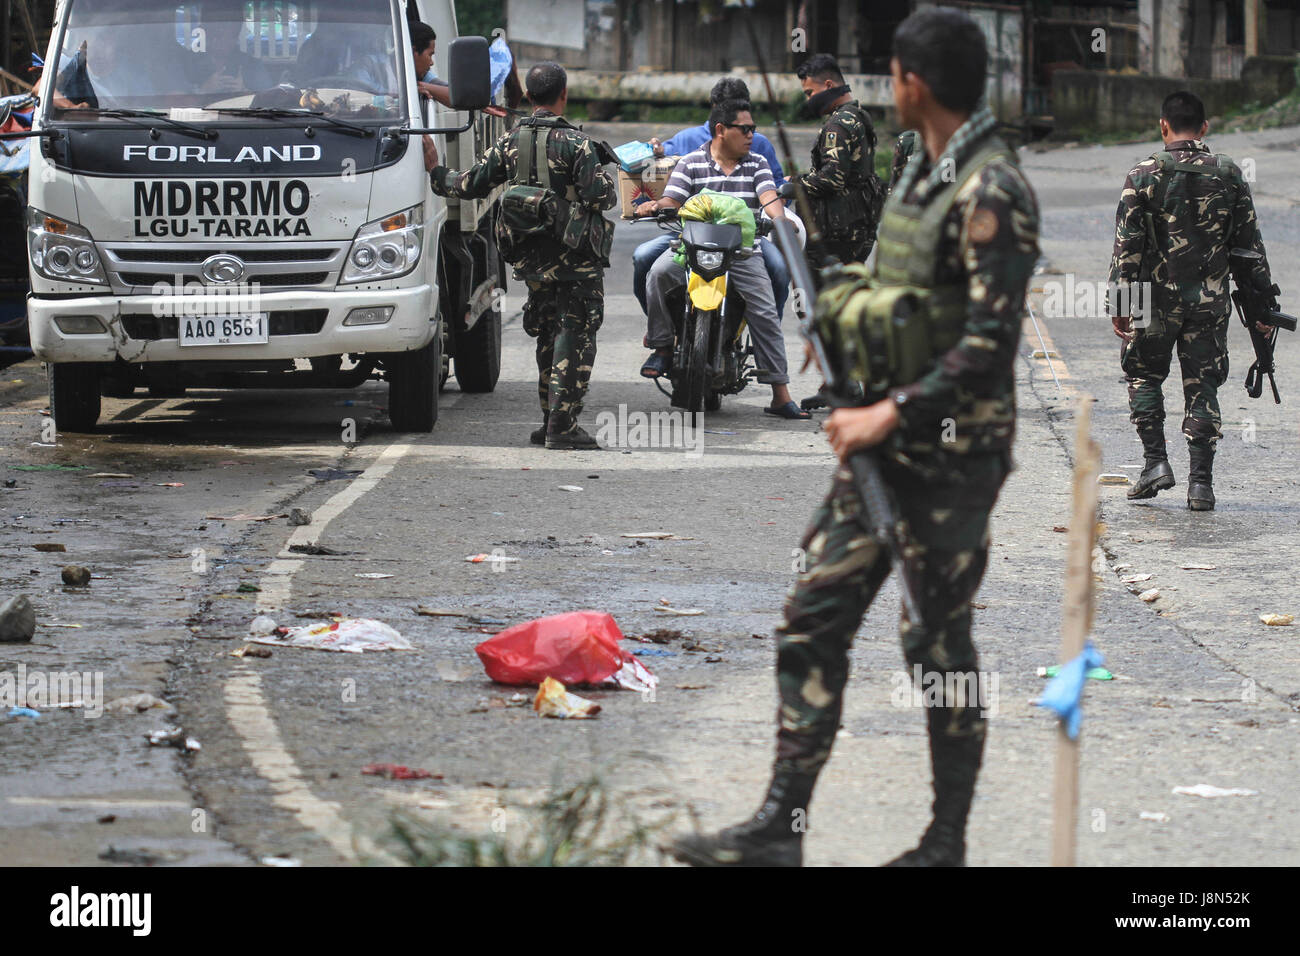 Marawi, Philippines. 29th May, 2017. Government forces inspect motorists at a checkpoint in Marawi city, southern Philippines. Philippine forces control most of the southern city where local rebel group sieged Marawi a week ago. Governemnt forces launched airstrikes armed Maute militants tried to take over the city. Credit: Linus Guardian Escandor Ii/ZUMA Wire/Alamy Live News Stock Photo